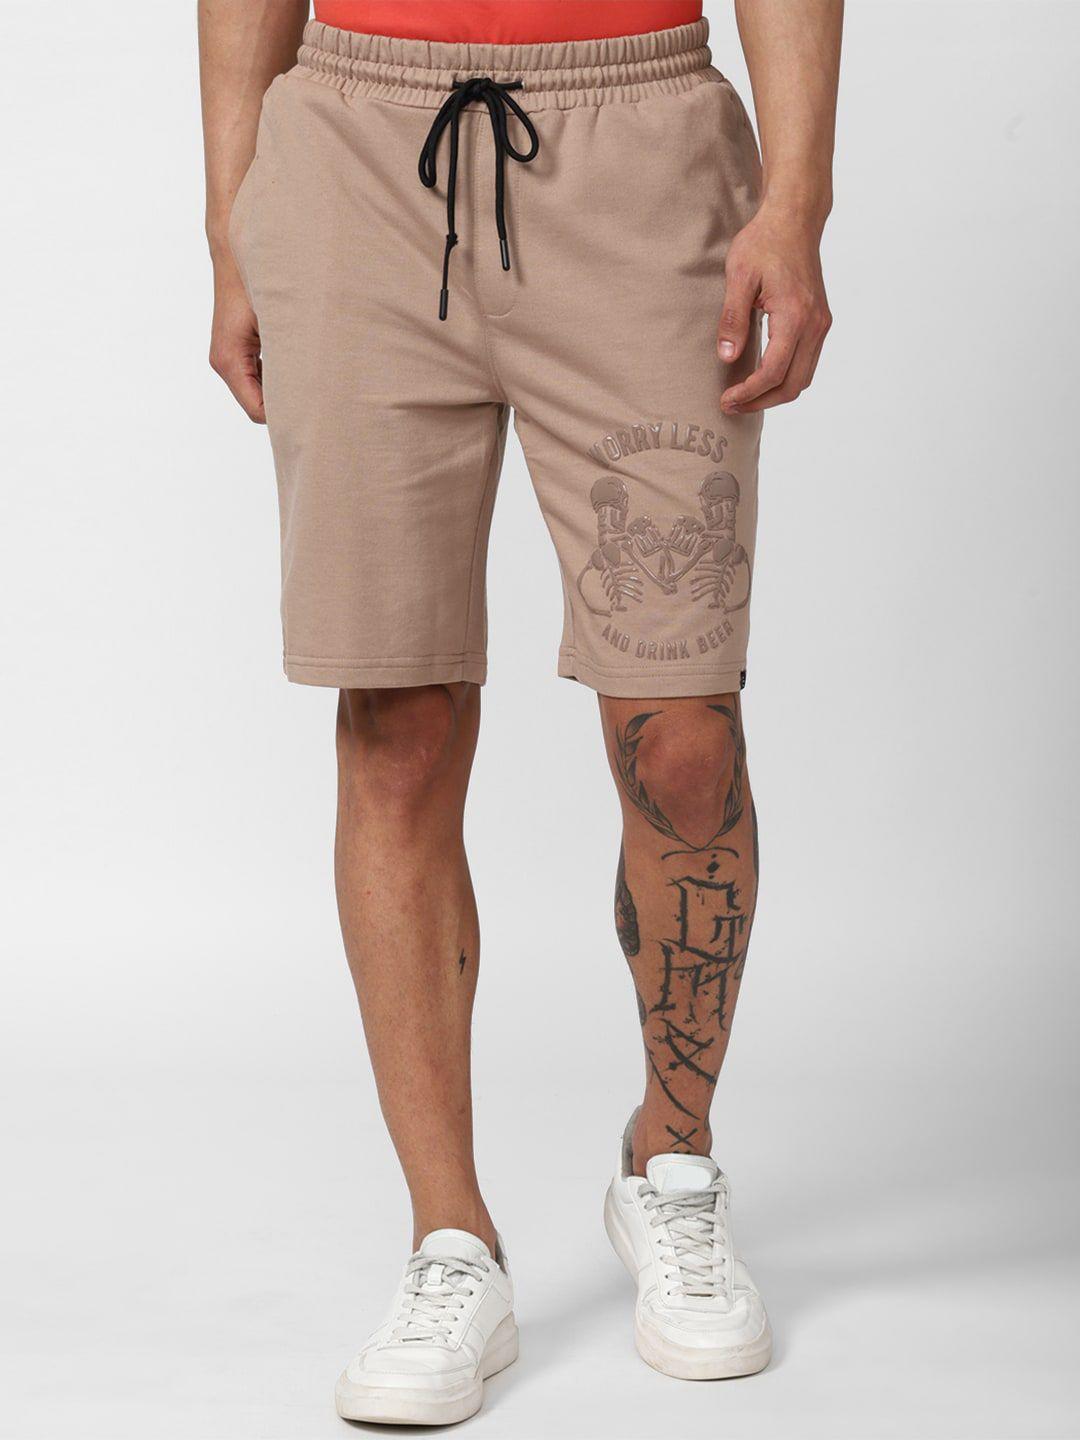 forever-21-men-brown-graphic-printed-knee-length-shorts